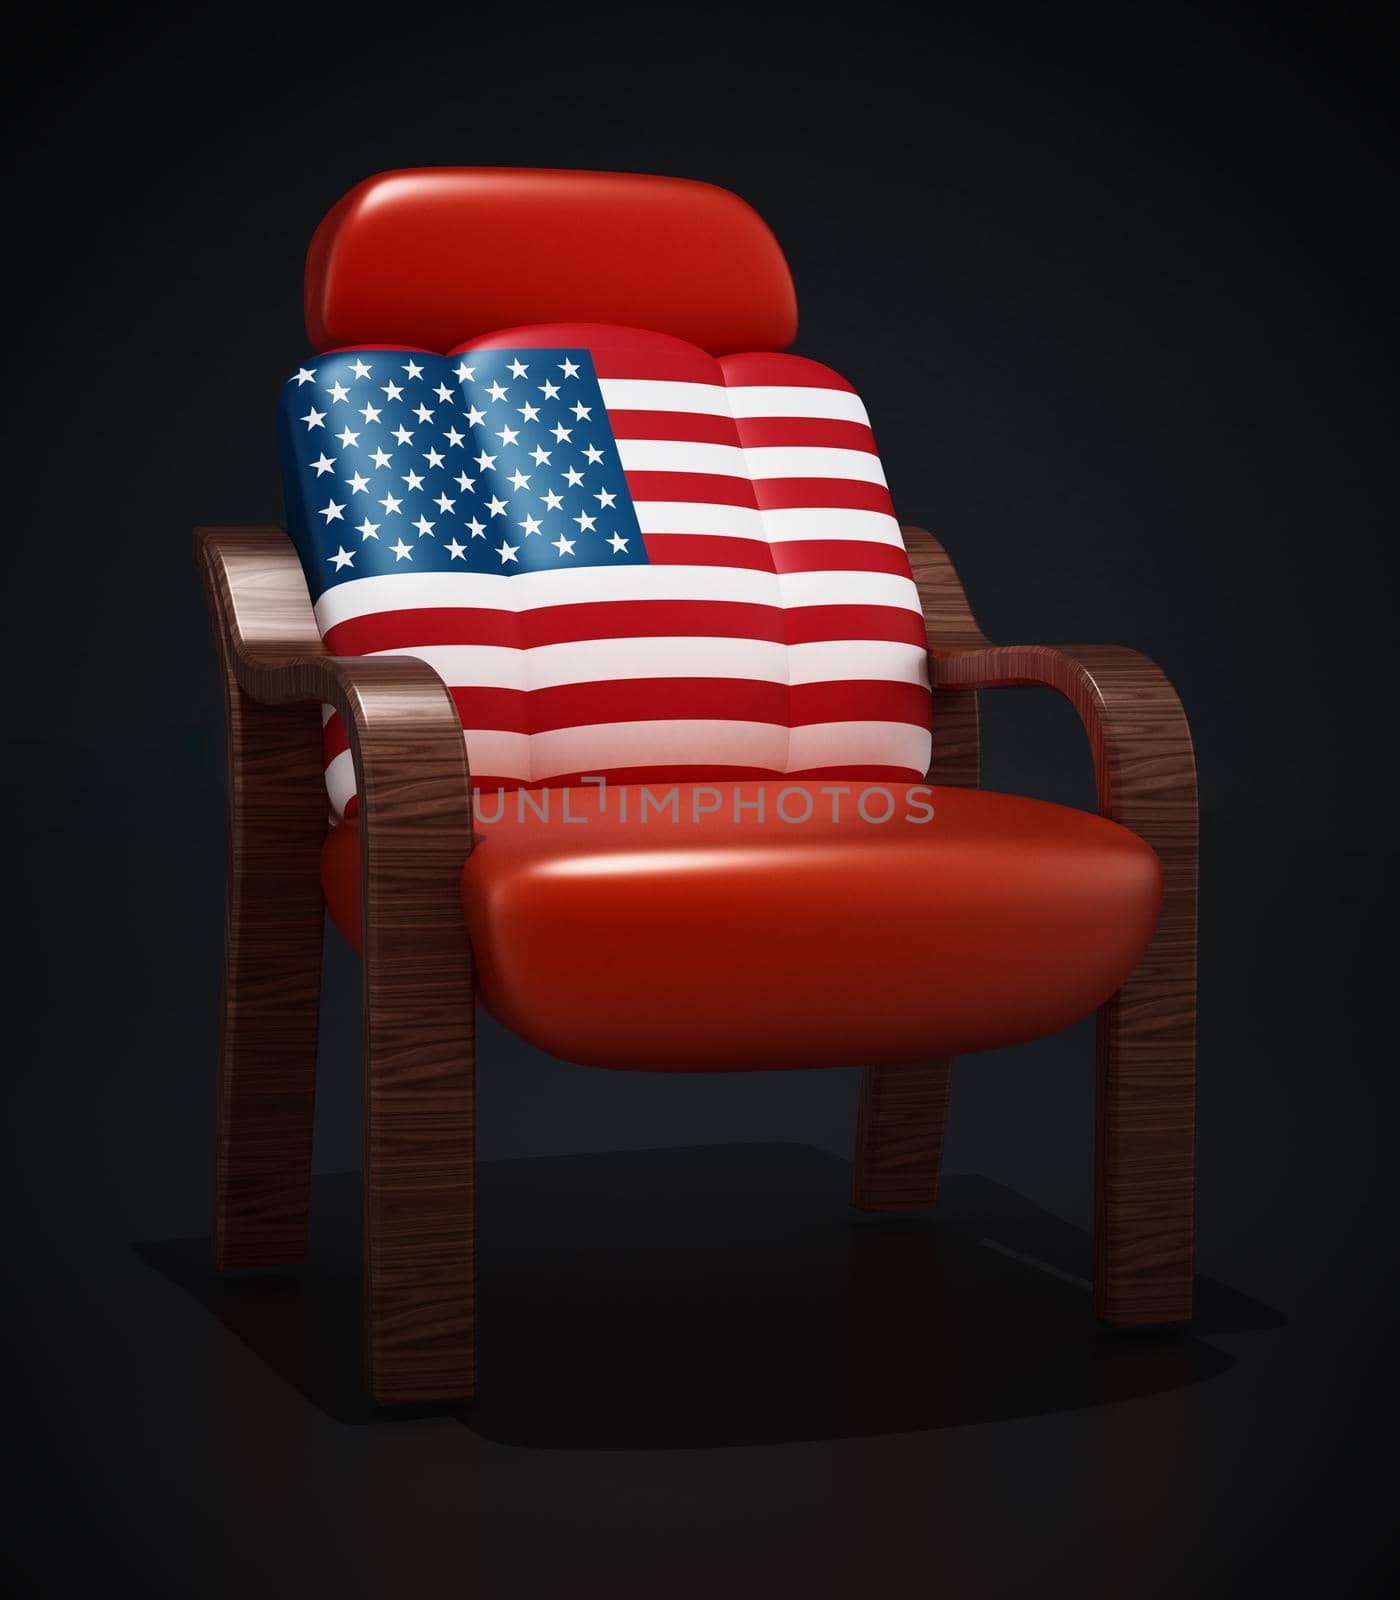 American flag textured luxury leather chair. 3D illustration.